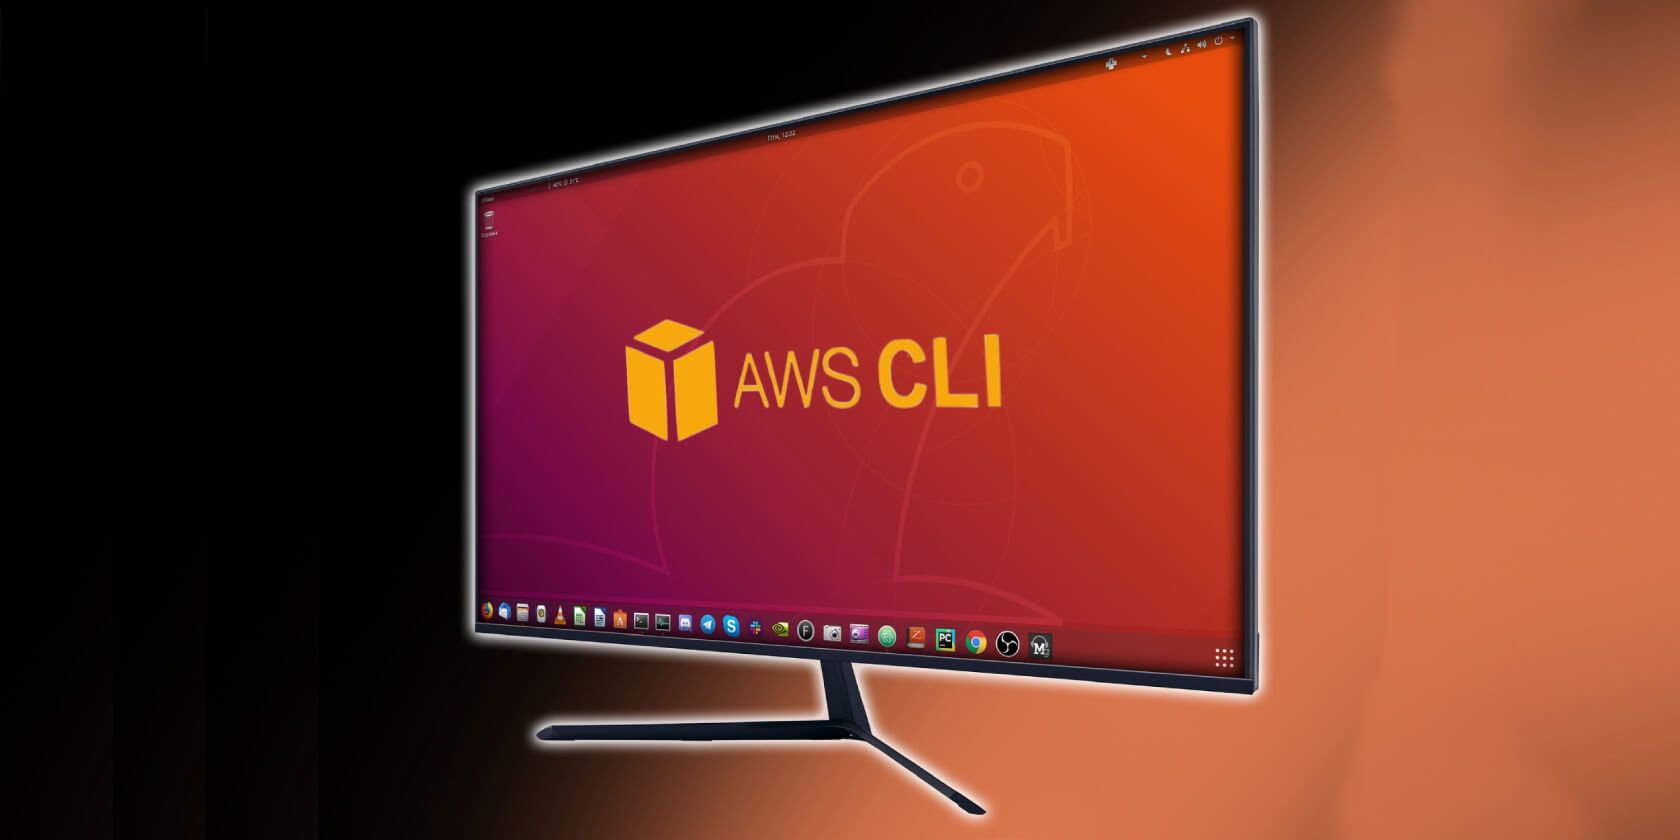 how to install glibc 2.18 on amazon linux